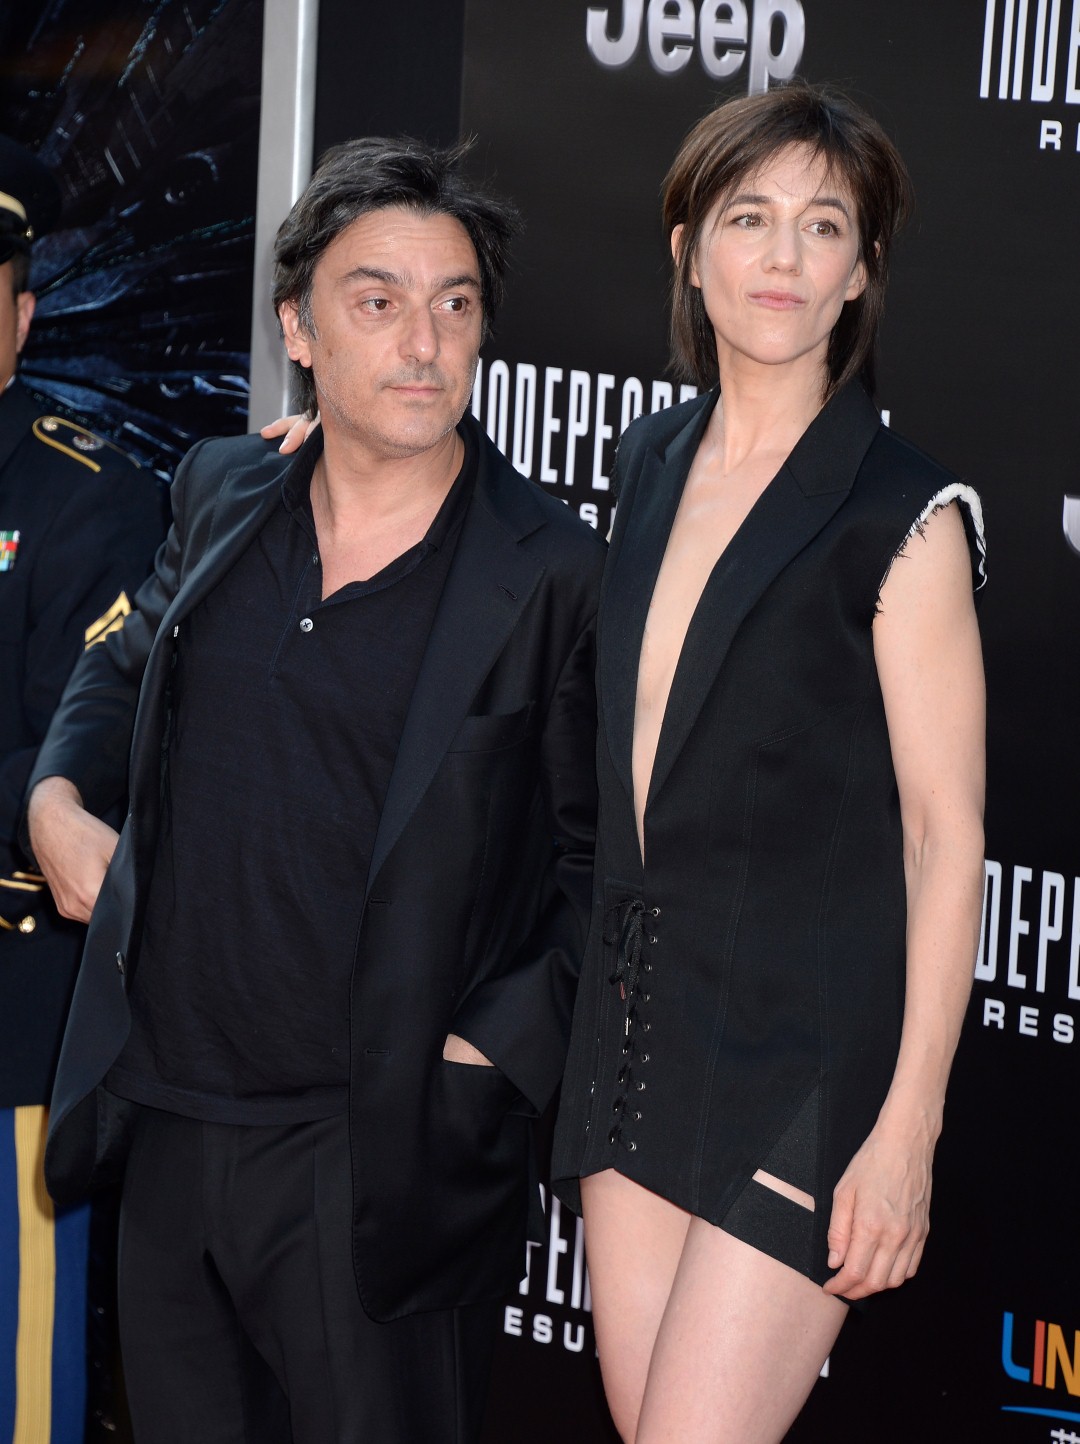 charlotte-gainsbourg-premiere-of-20th-century-foxs-independence-day-resurgence-tcl-chinese-theatre-hollywood-62016-4 (Large).jpg